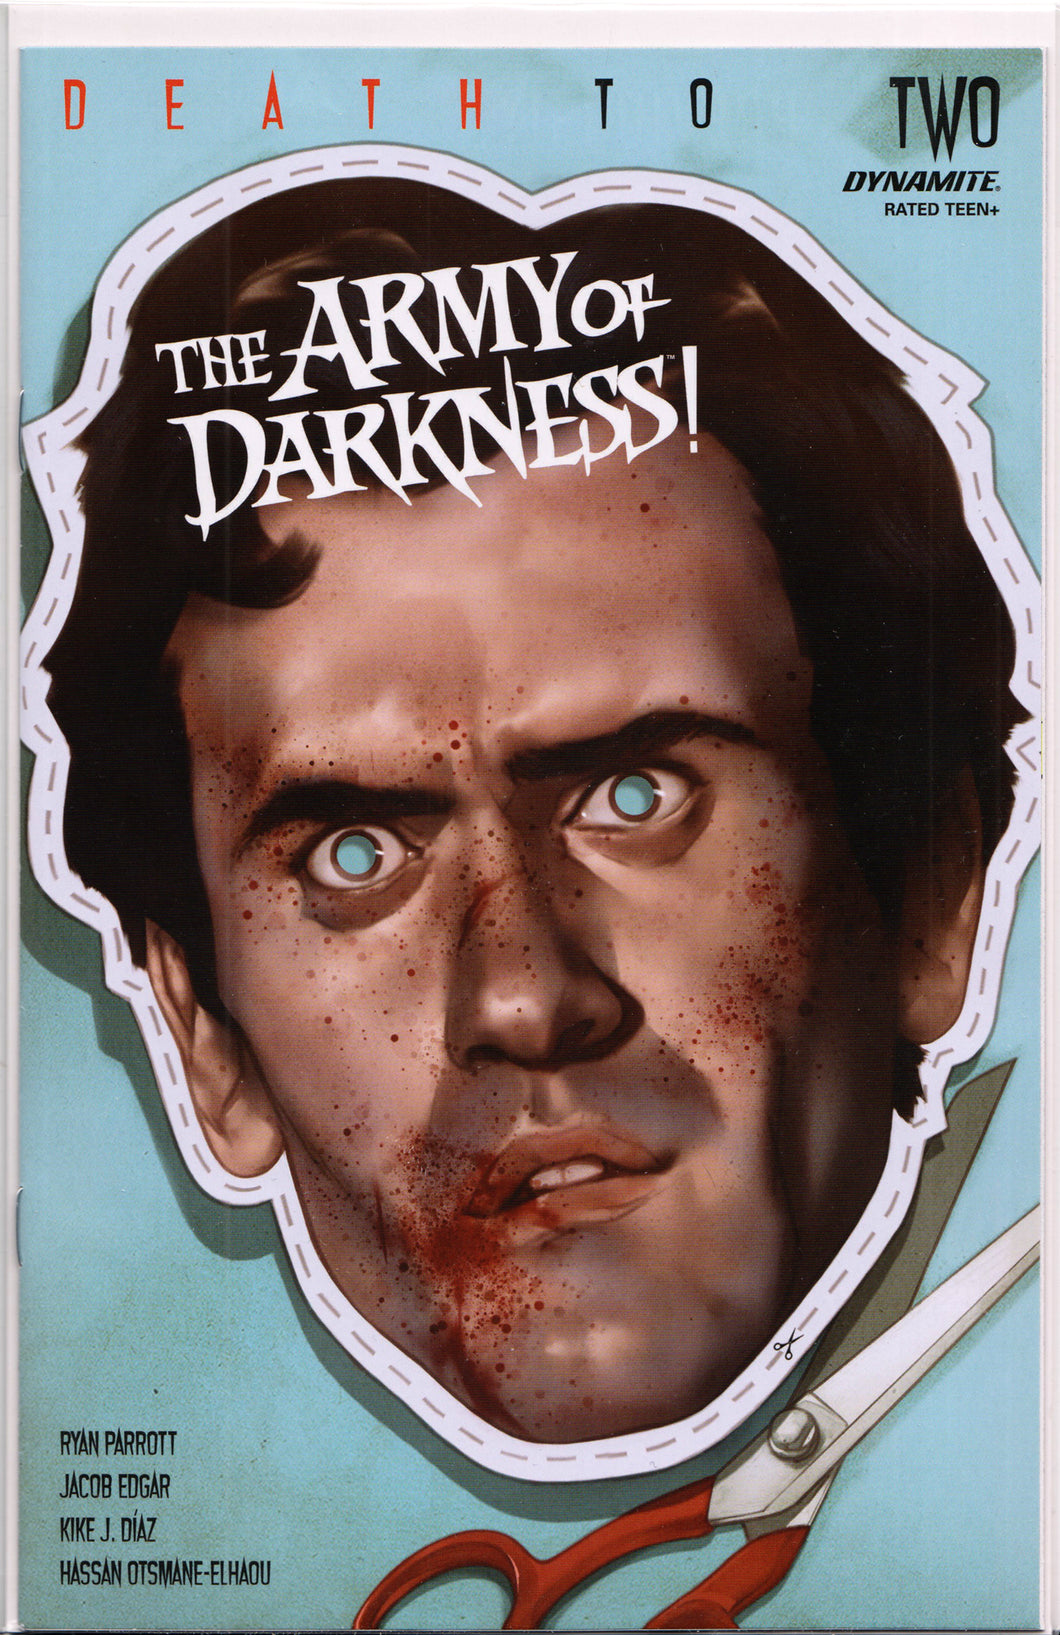 DEATH TO THE ARMY OF DARKNESS #2 (BEN OLIVER VARIANT) COMIC BOOK ~ Dynamite